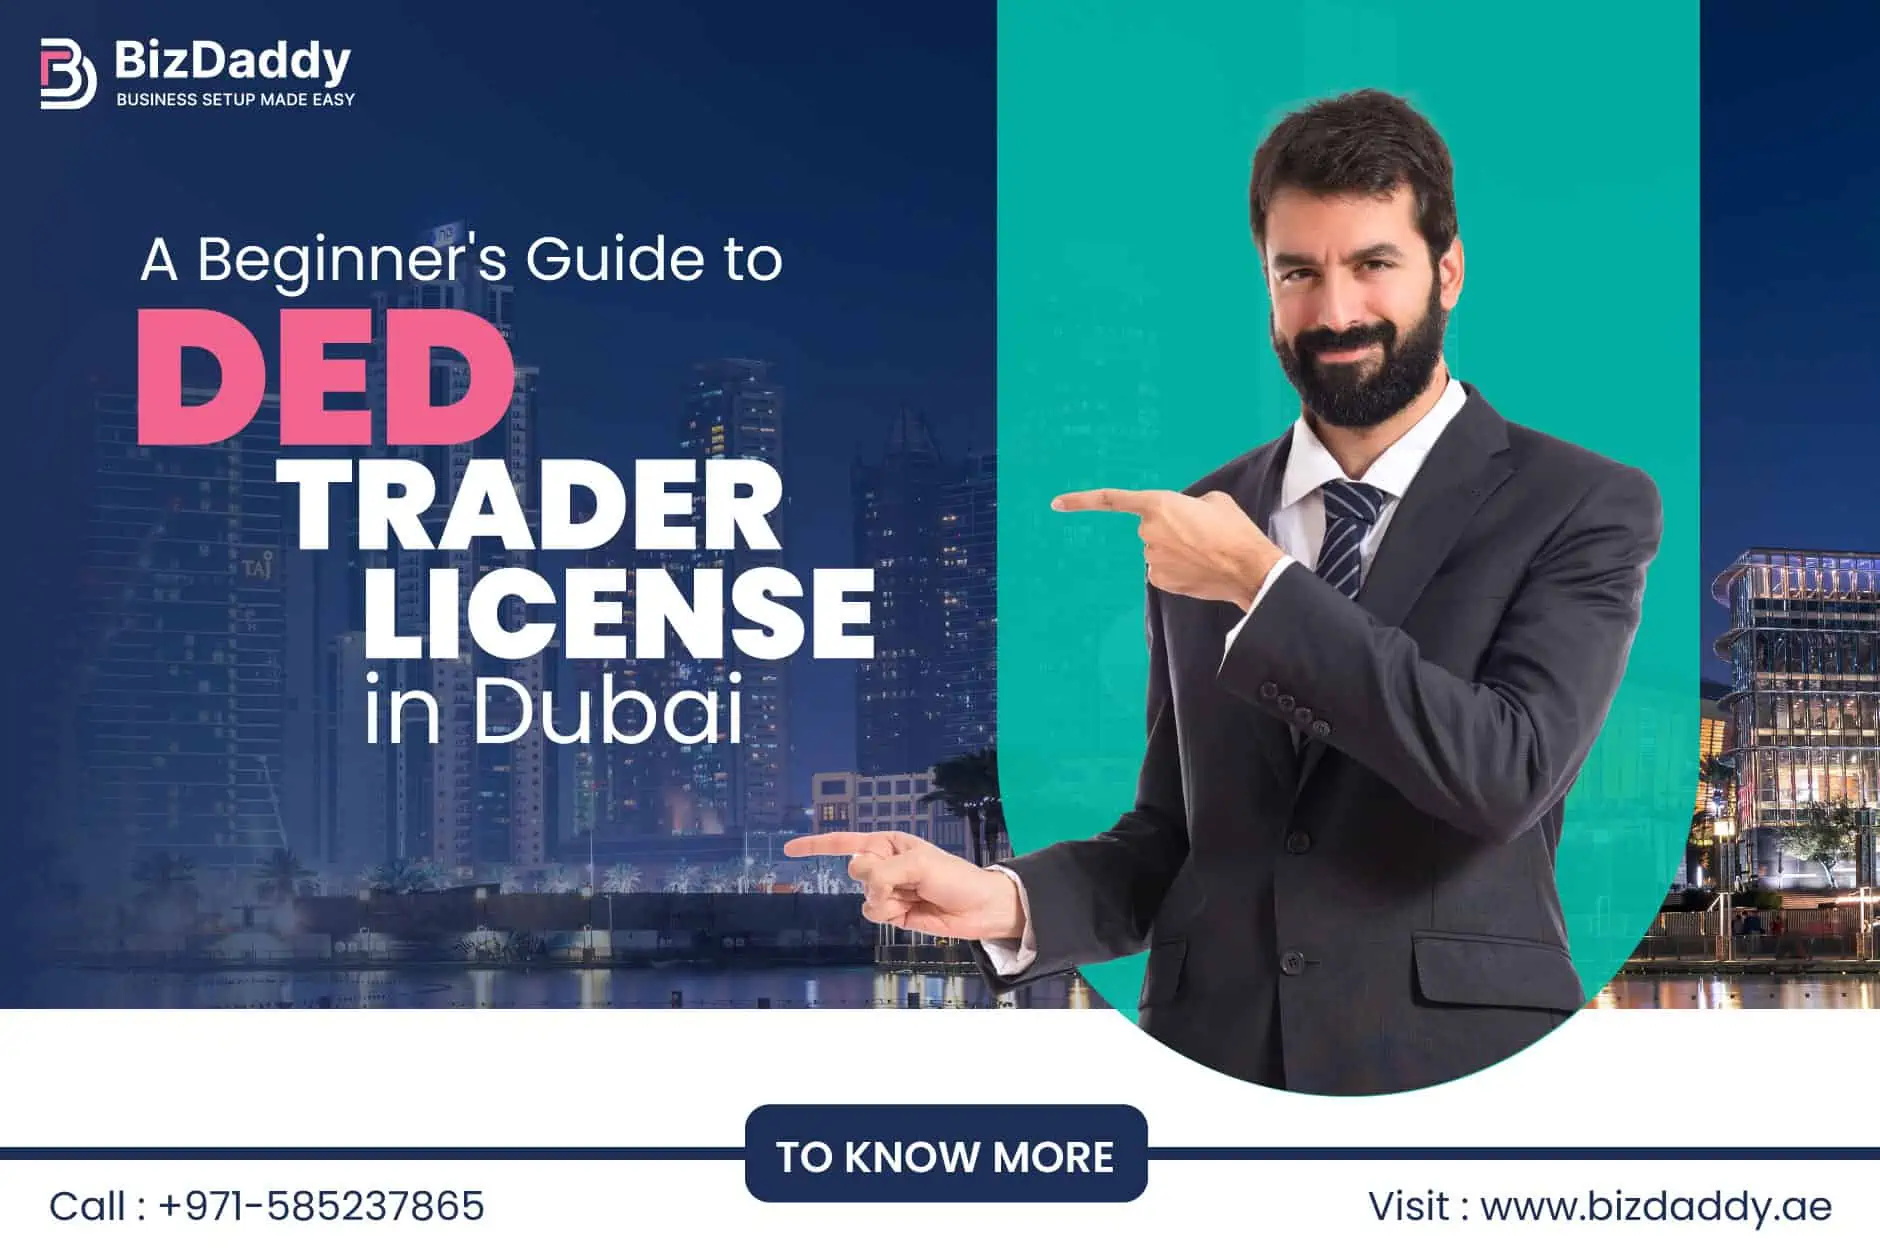 A Beginner’s Guide To DED Trader License In Dubai | bizdaddy